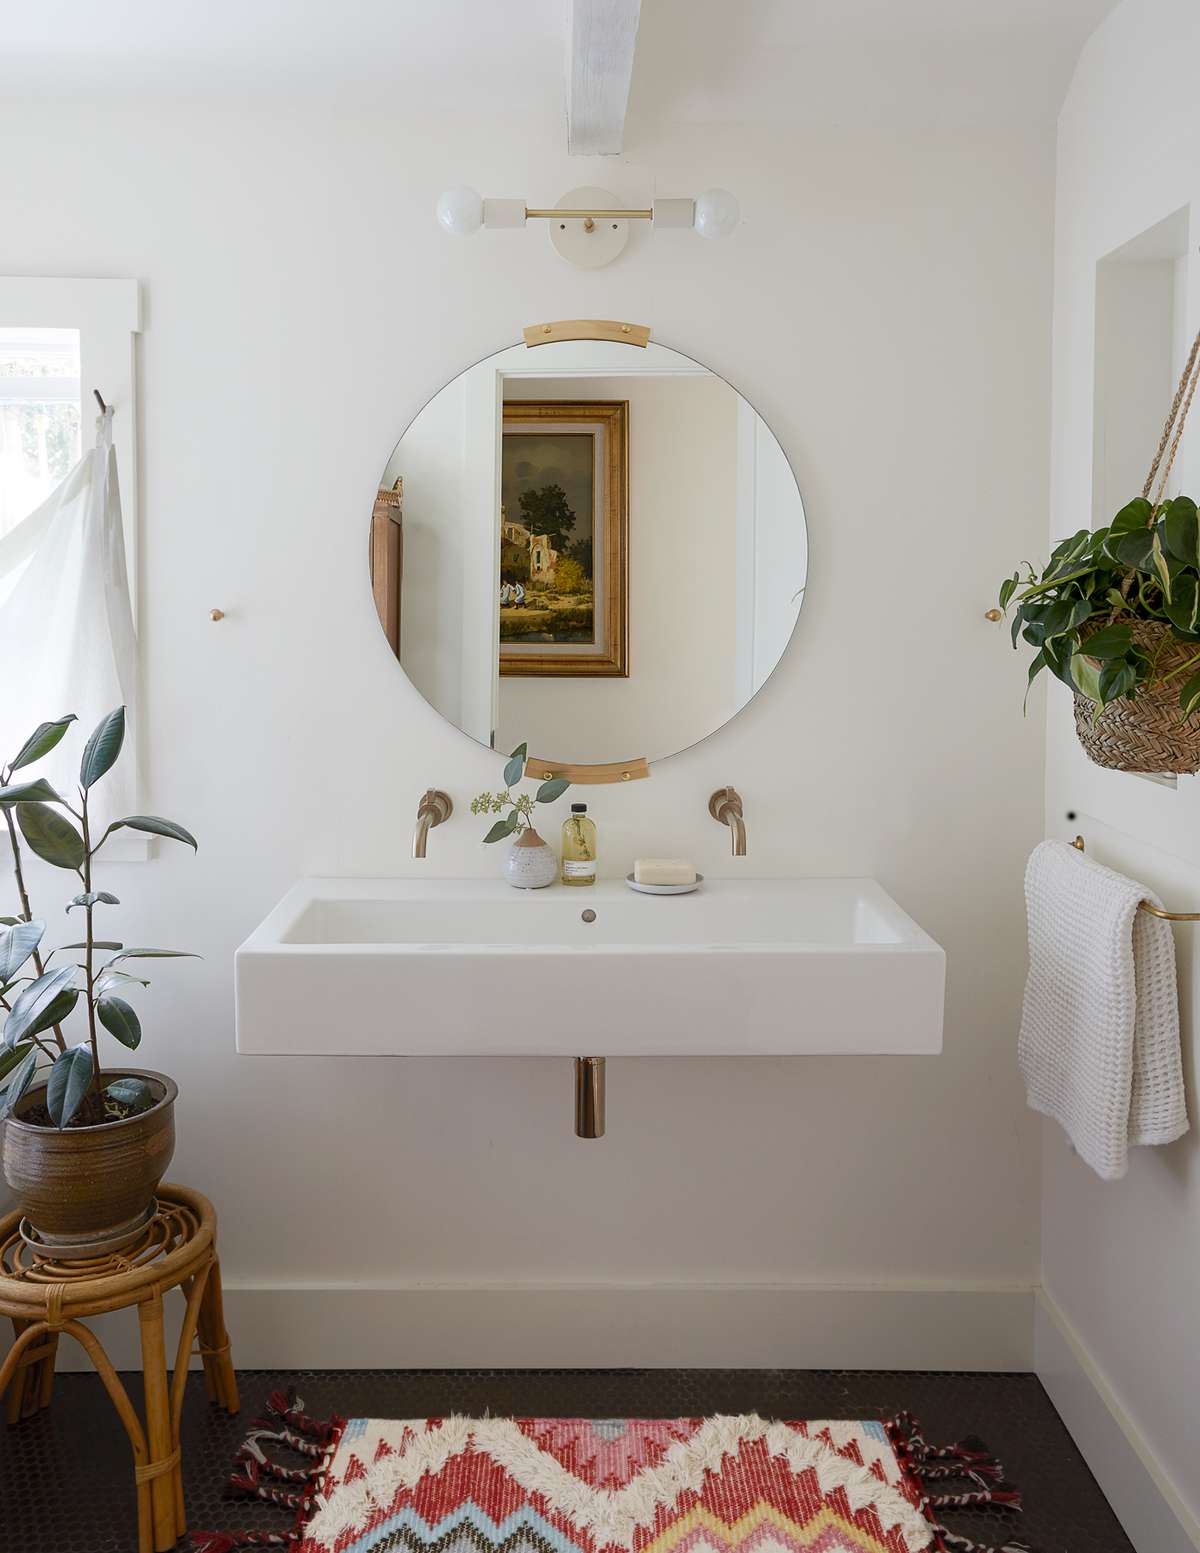 6 Bathroom Paint Colors We Re Loving In, Small Bathroom Paint Colors 2021